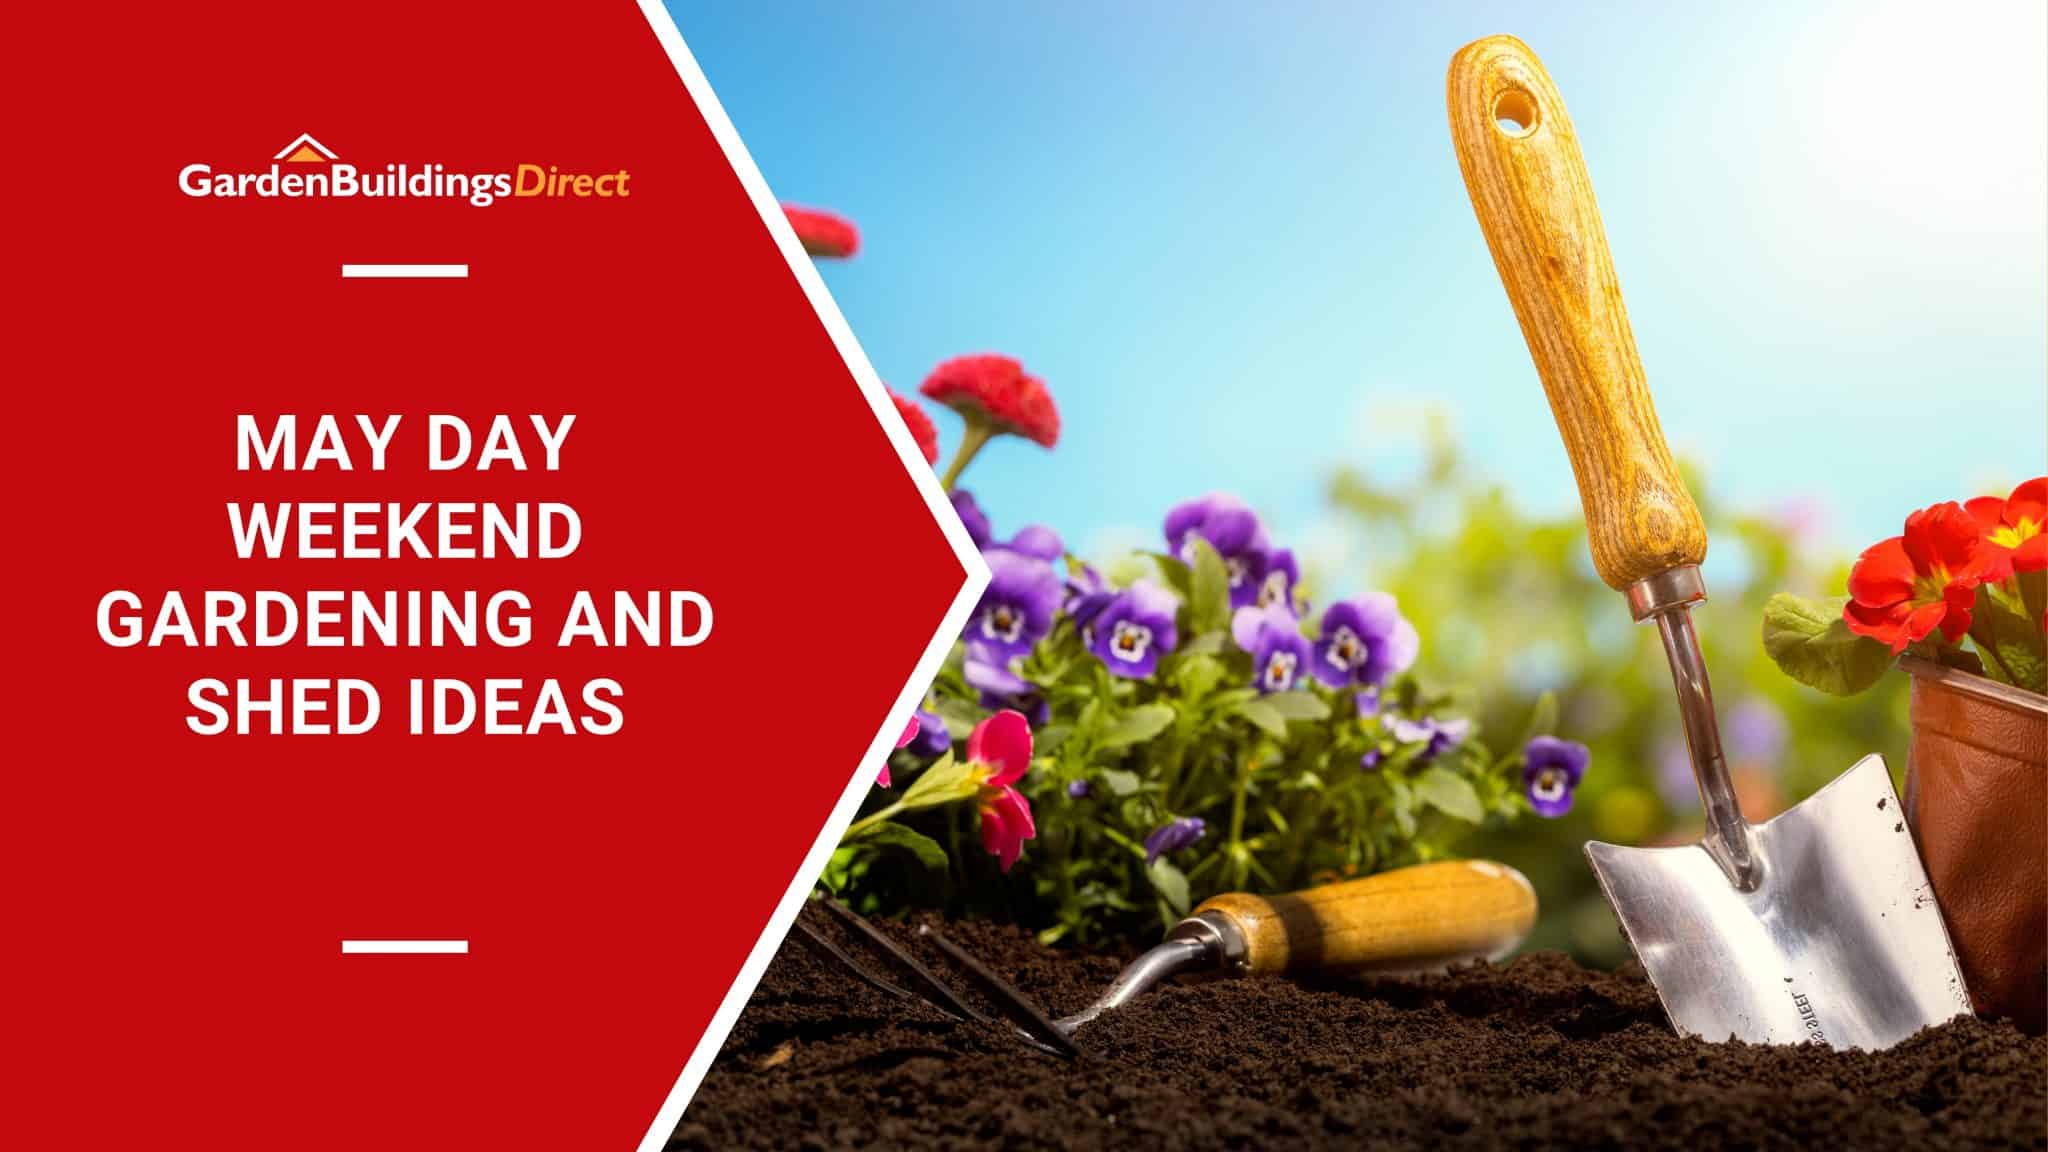 May Day Weekend Gardening and Shed Ideas Blog